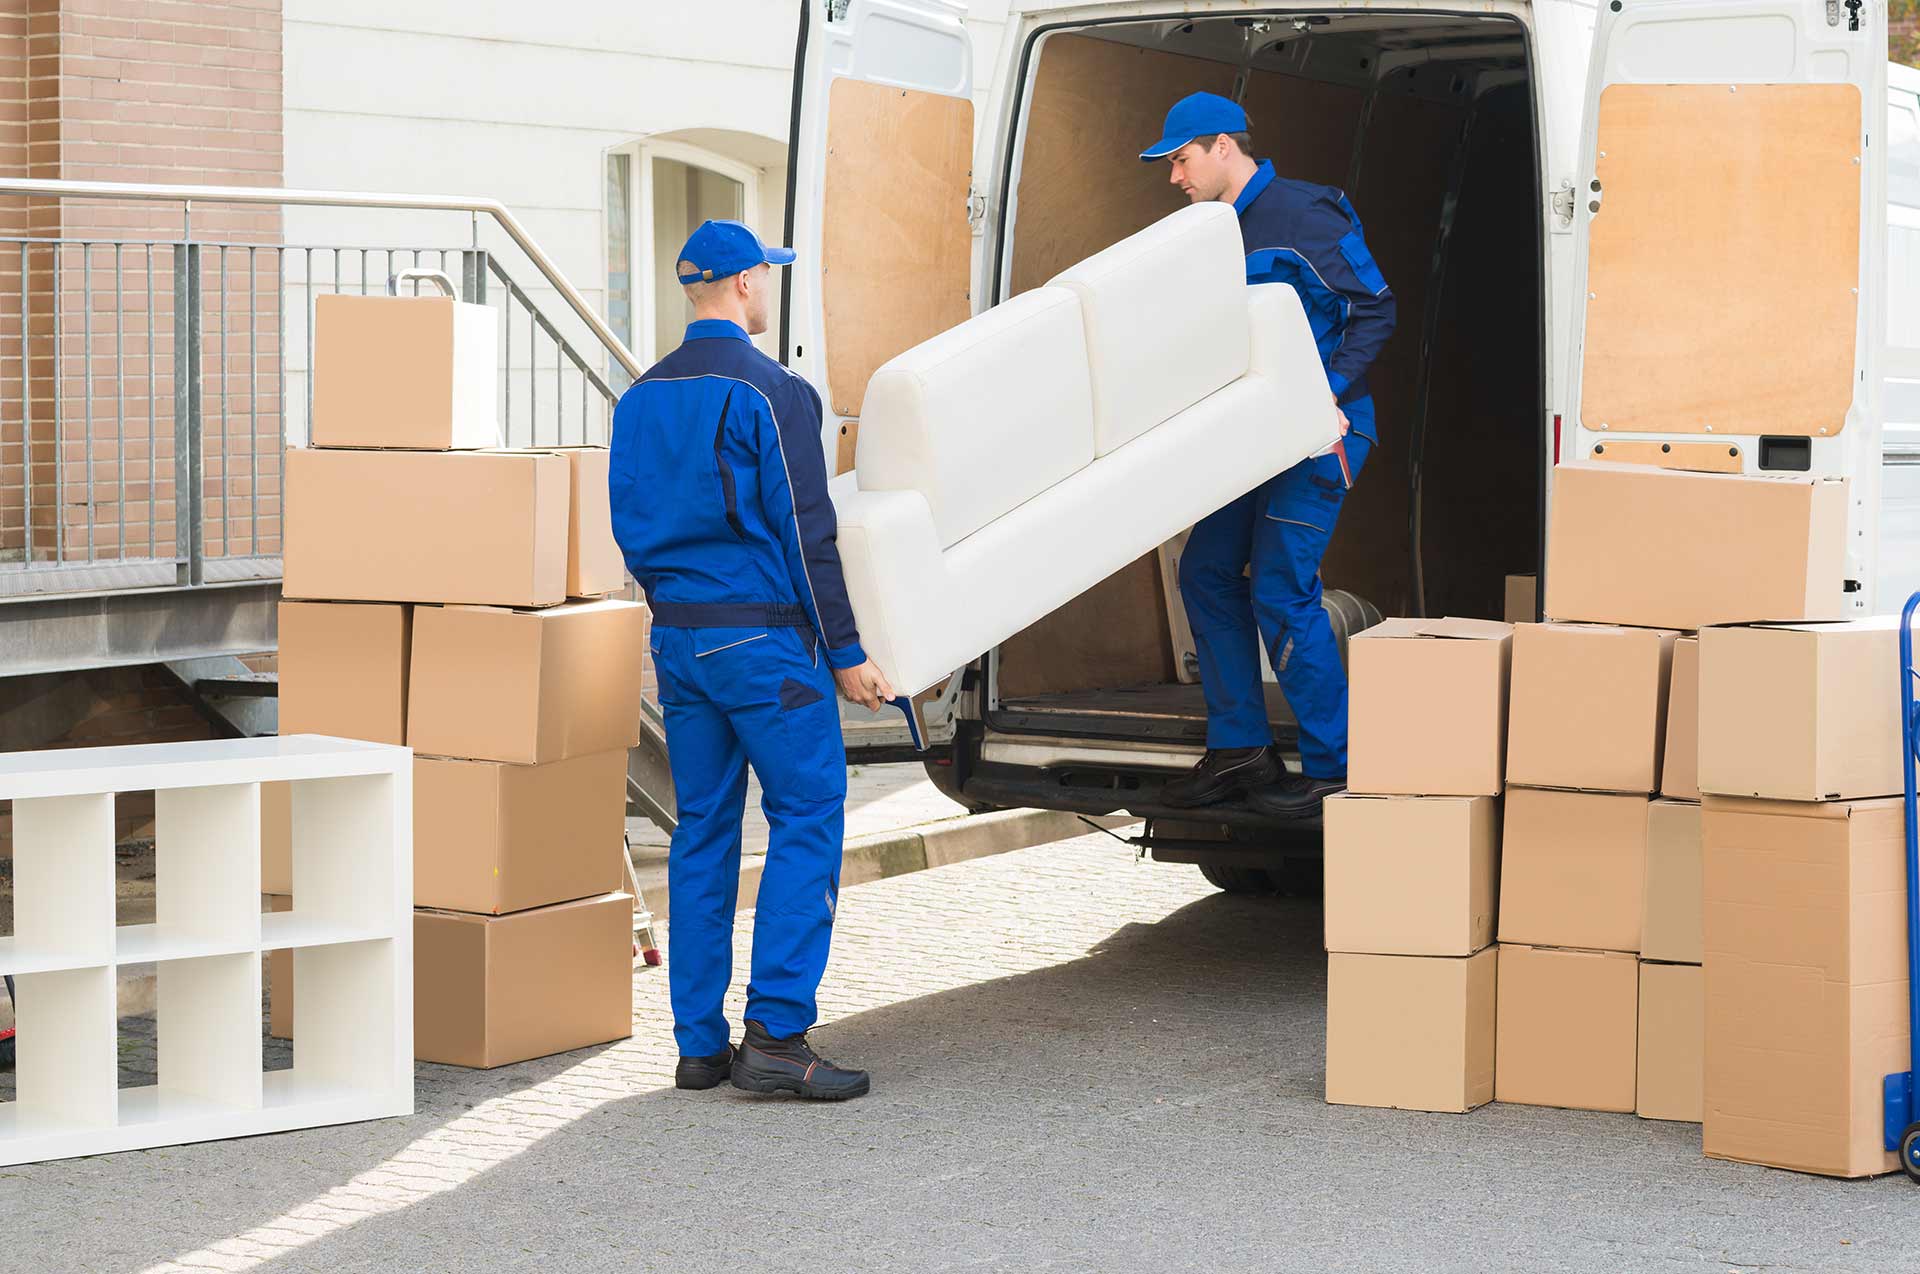  Moving Services Industry In the US